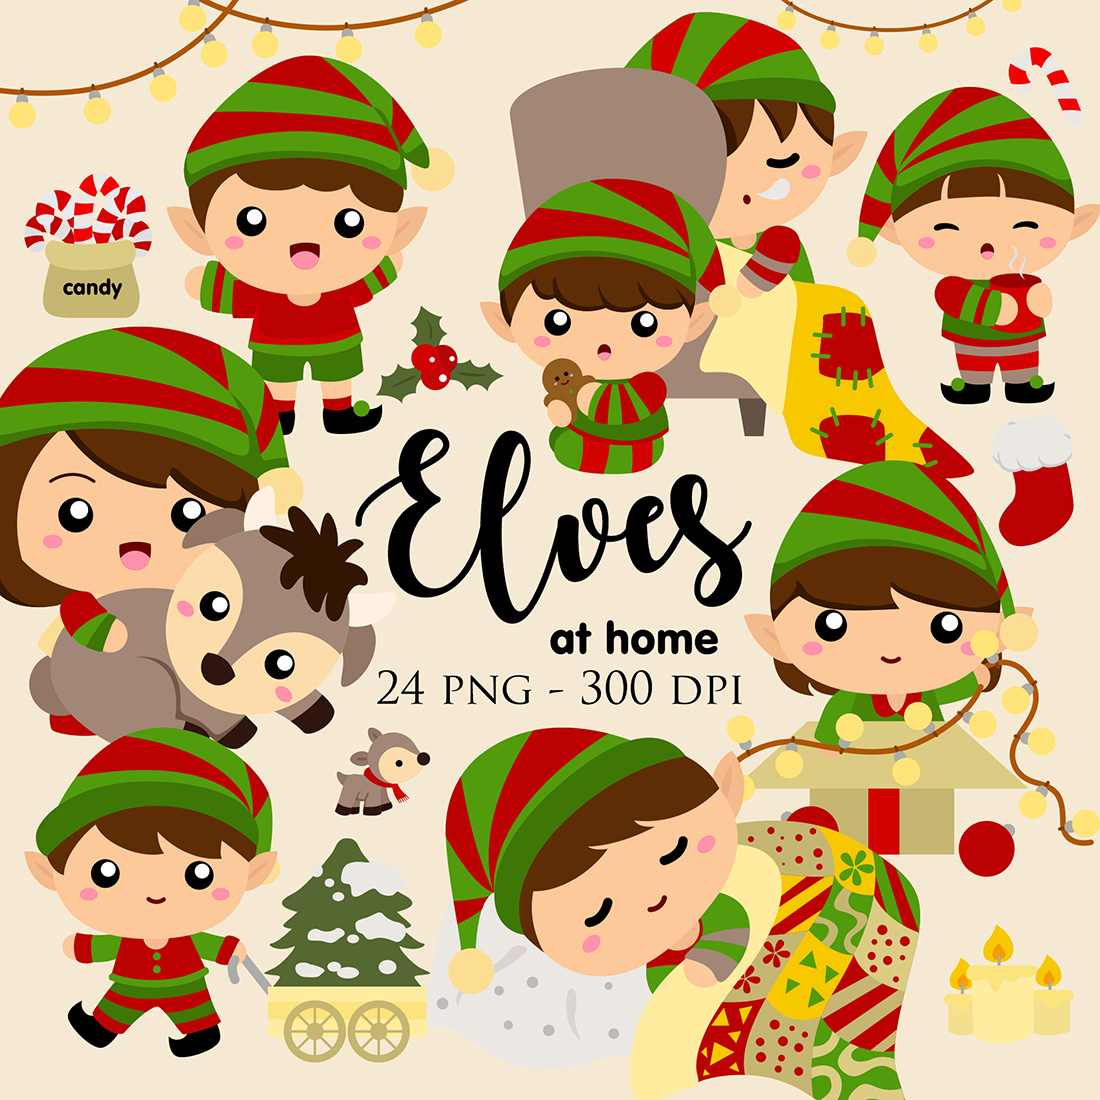 christmas party invitation clipart